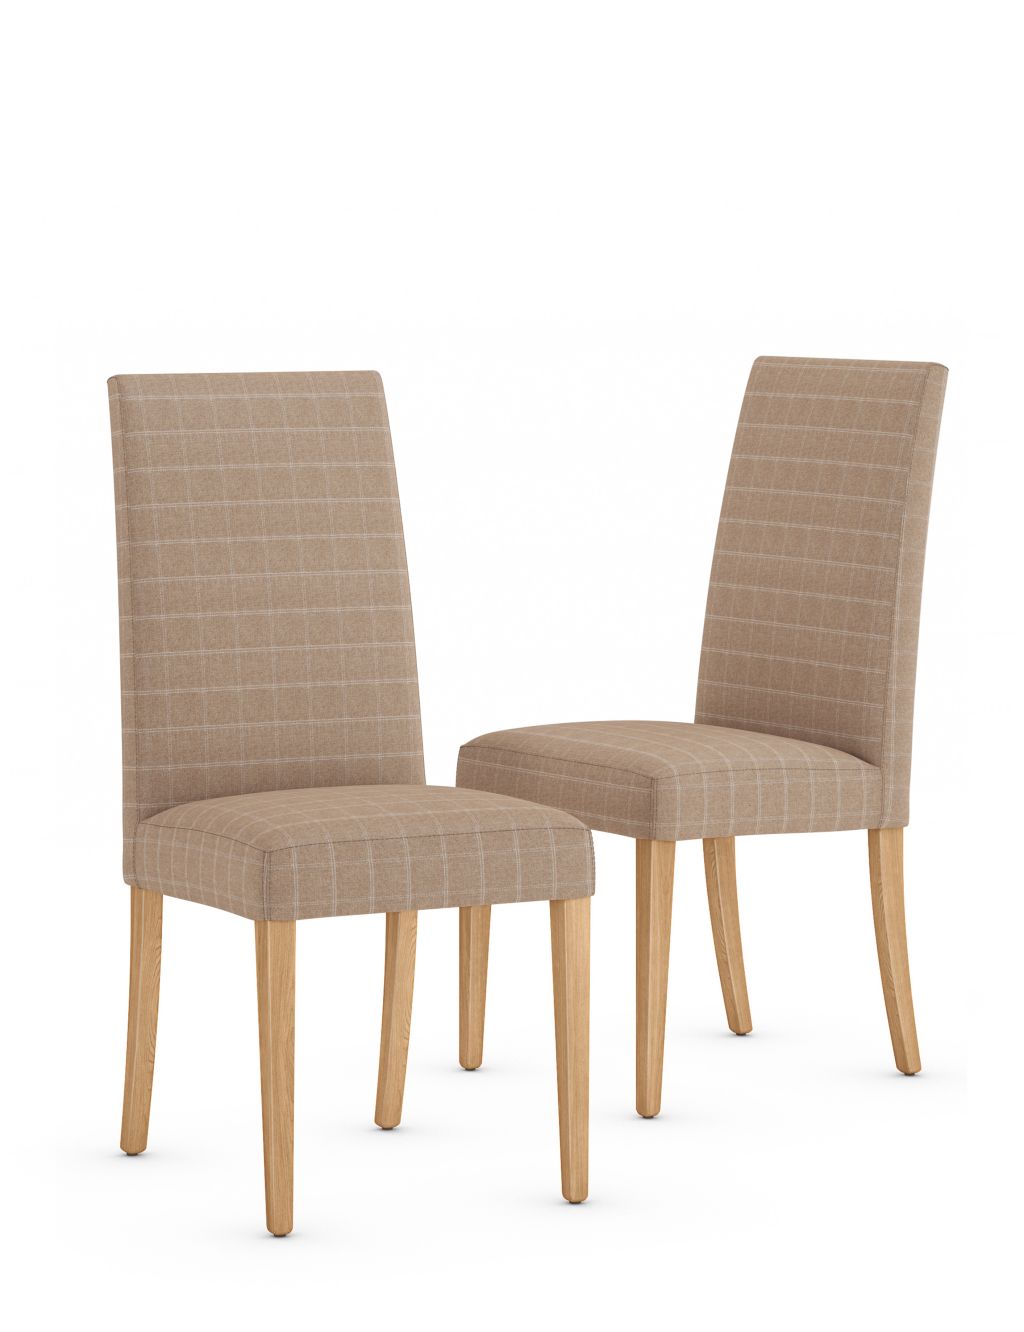 Set of 2 Alton Checked Dining Chairs